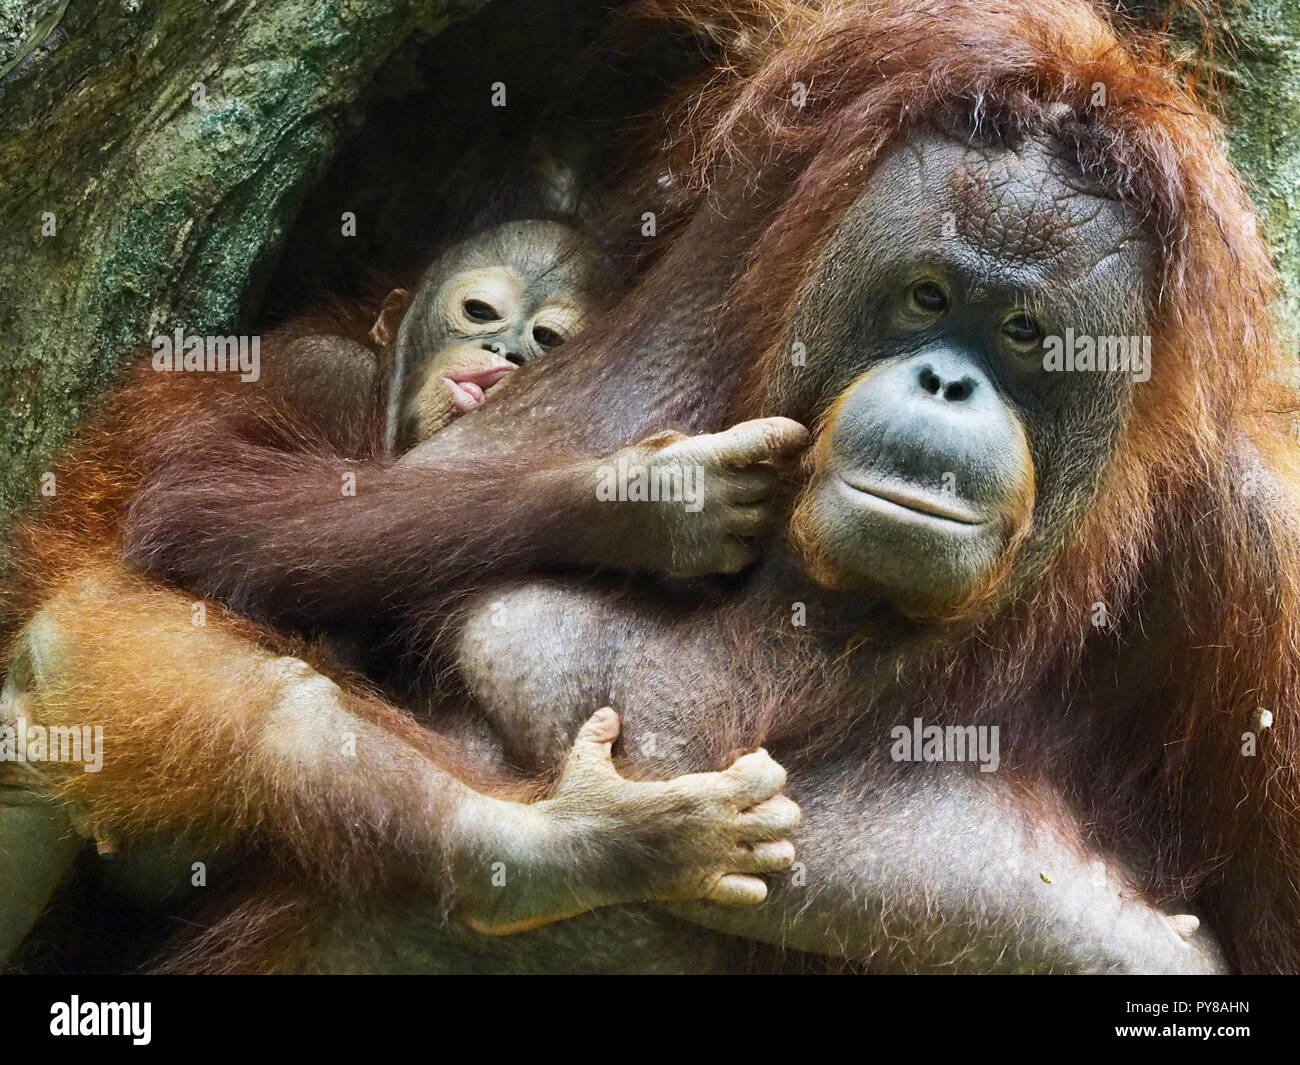 Orang Utan is looking at the camera and showing the expression Stock Photo